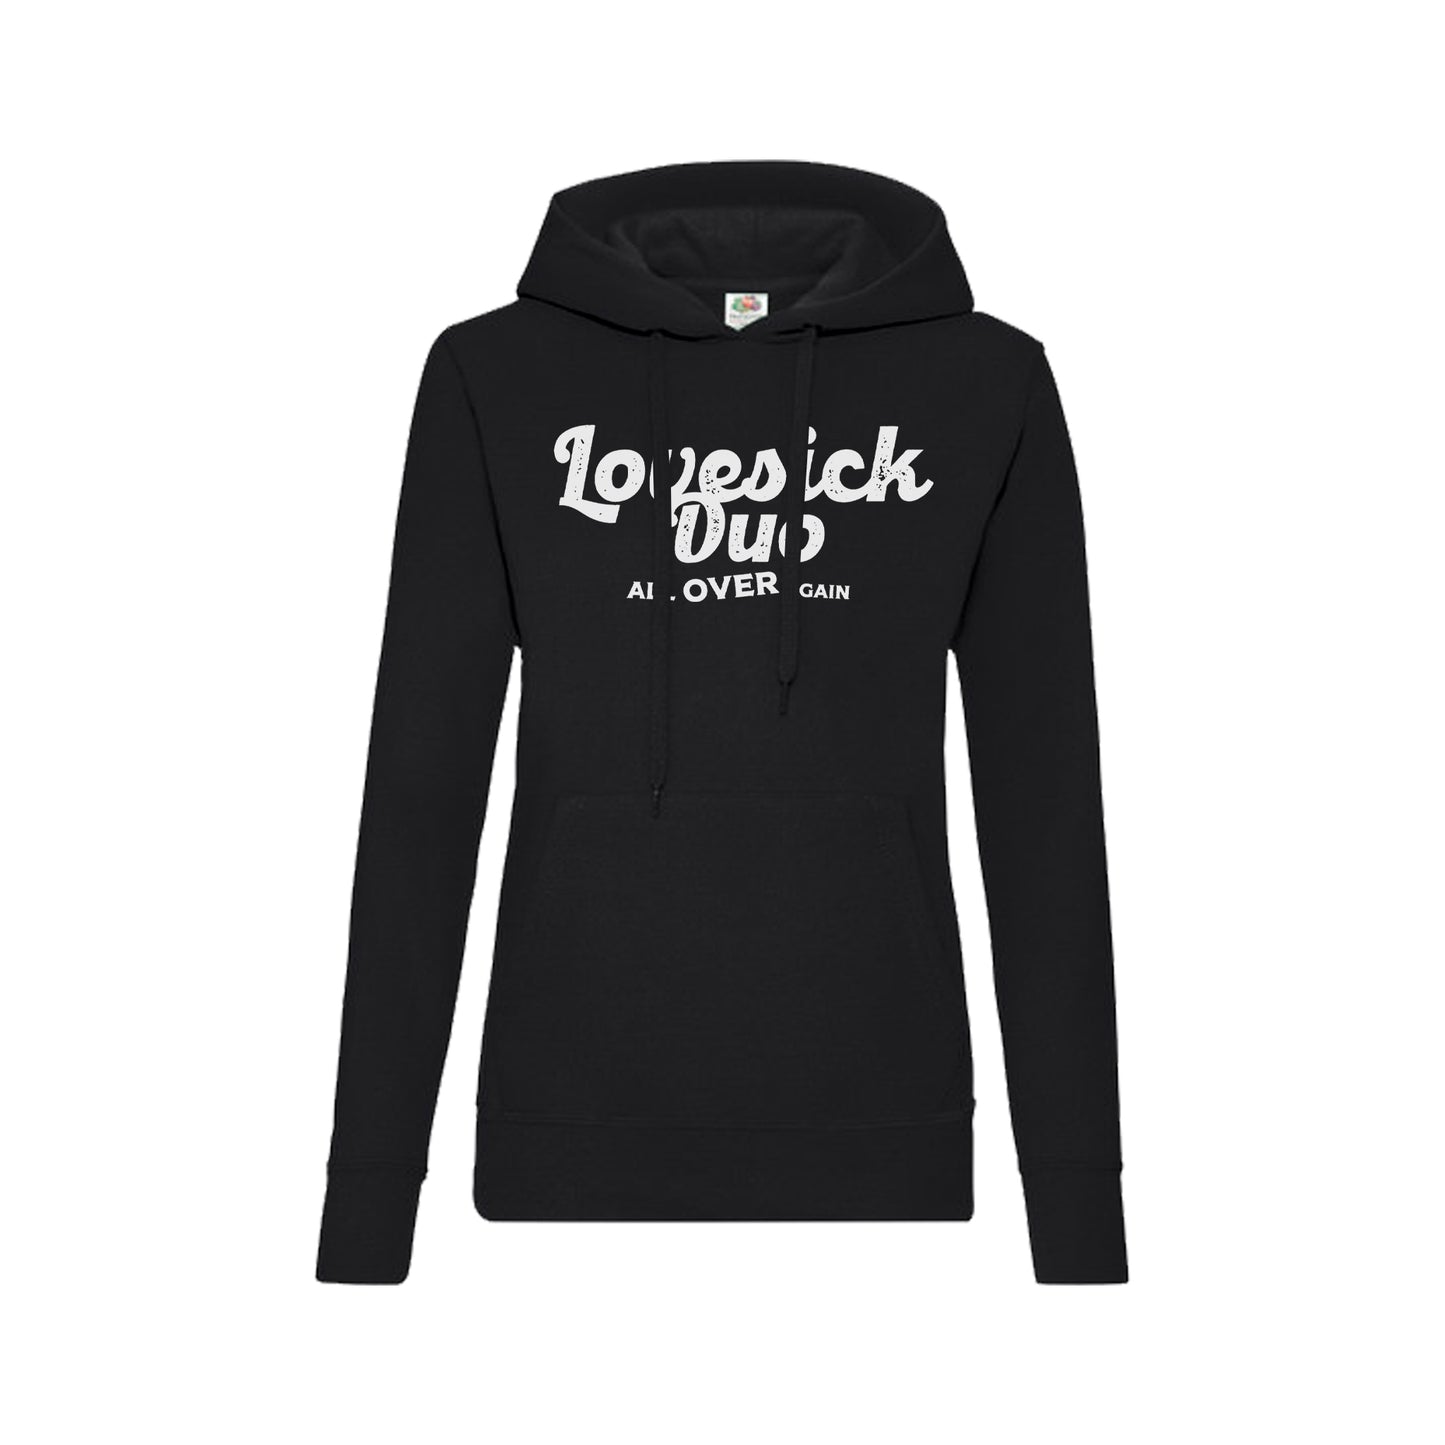 Lovesick Duo Hoodie  "All Over Again" Donna